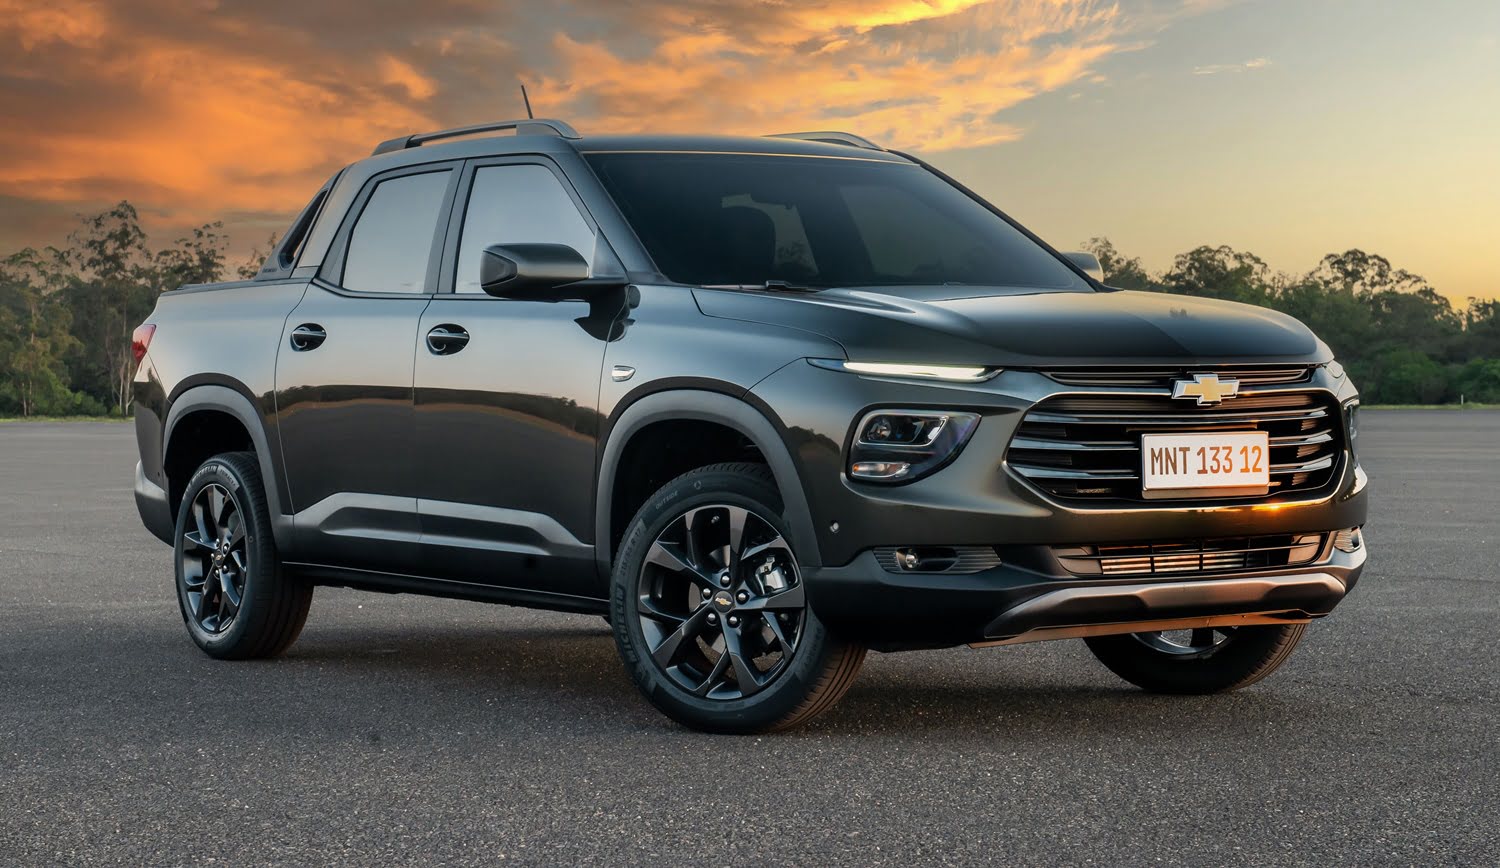 New 2022 Chevy S10 Z71 Officially Launches In Brazil